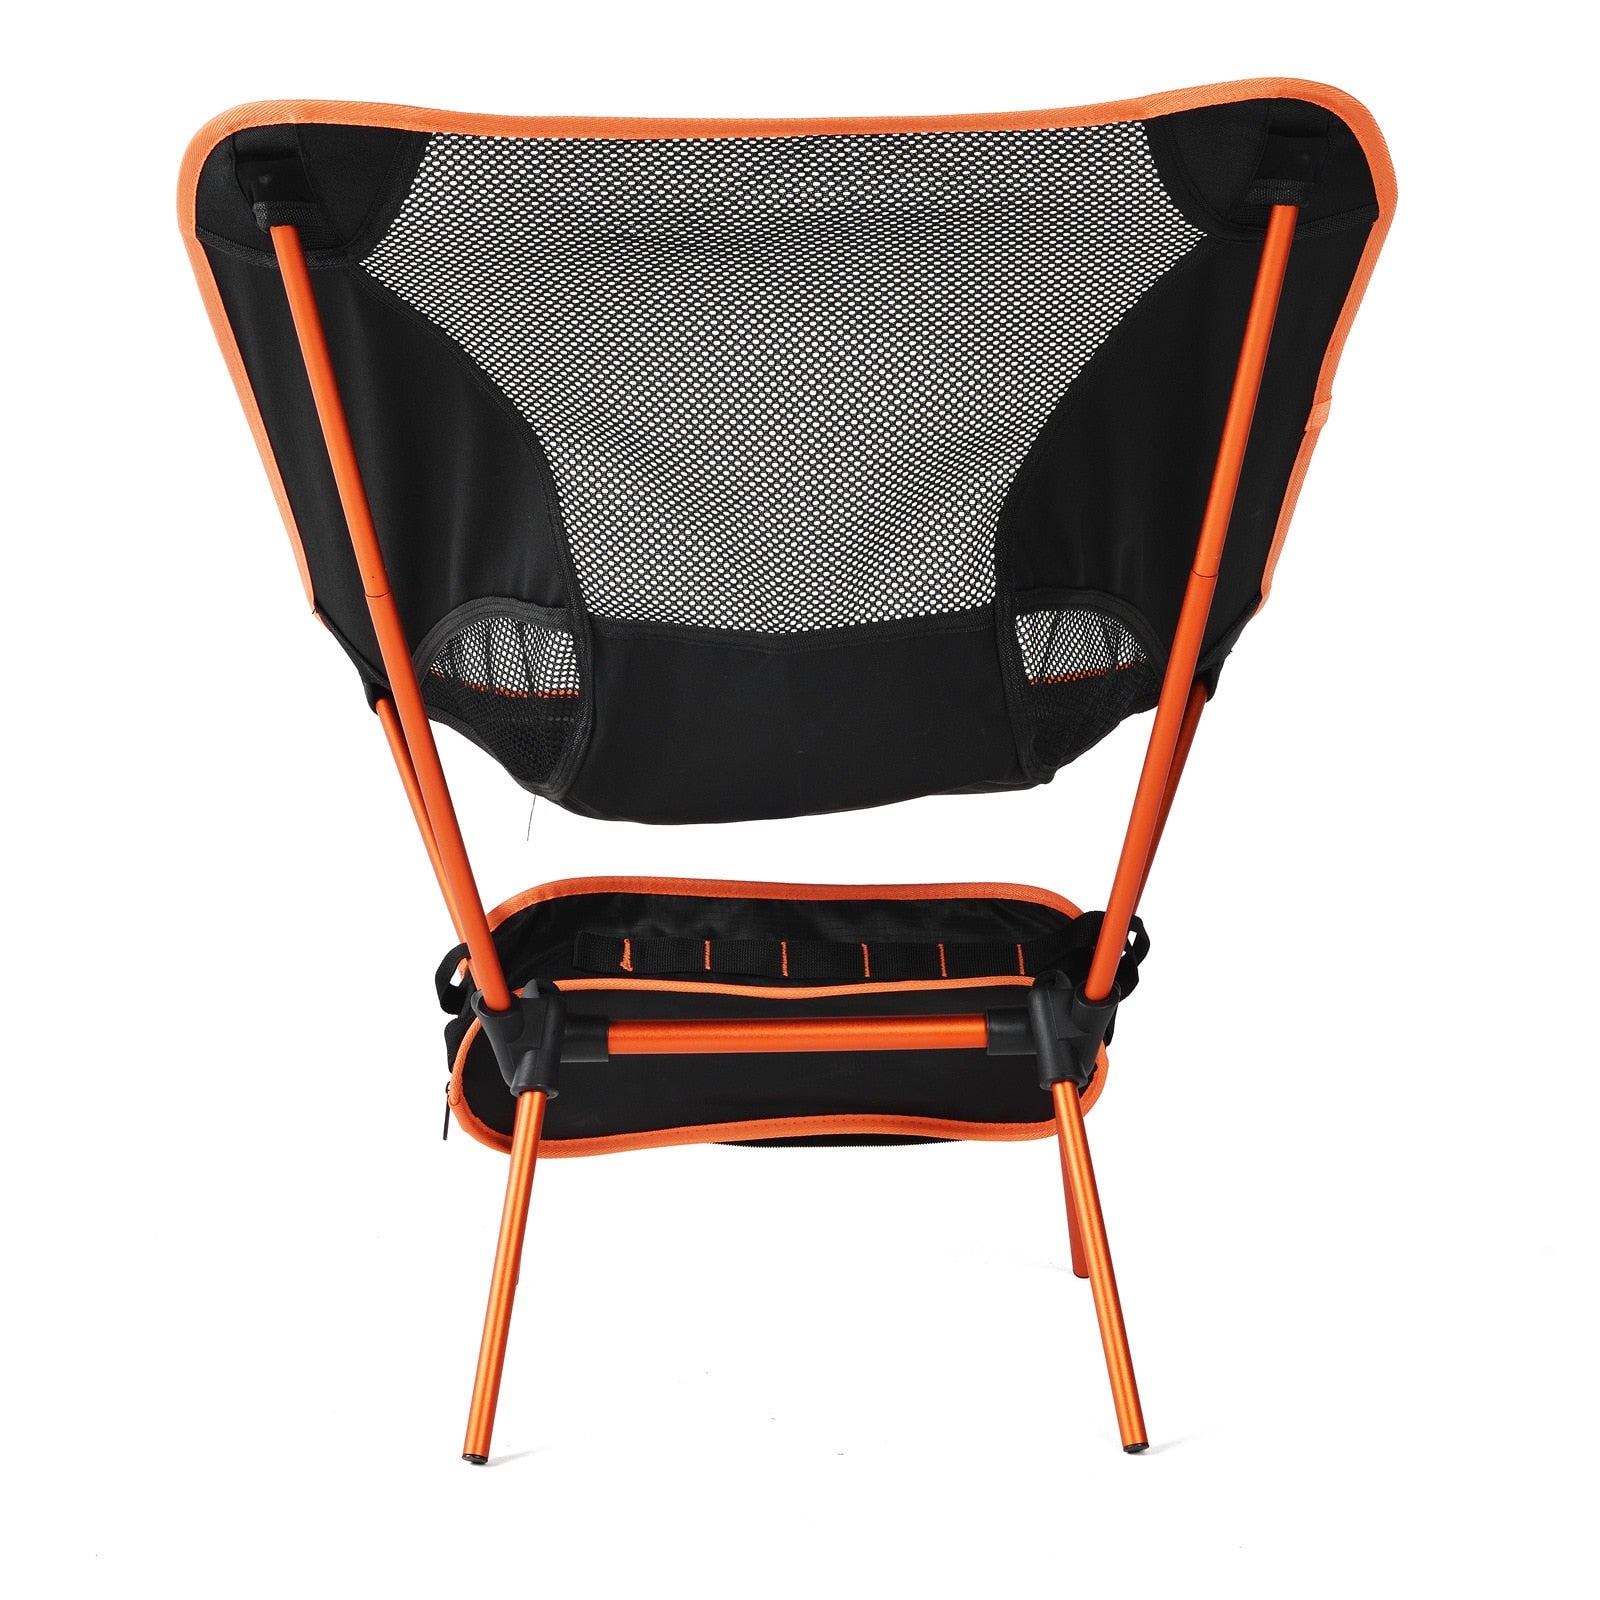 Portable Ultralight Folding Chair 210KG High Load Outdoor Camping Chair Hiking Picnic Fishing Seat High Strength Aluminum Alloy